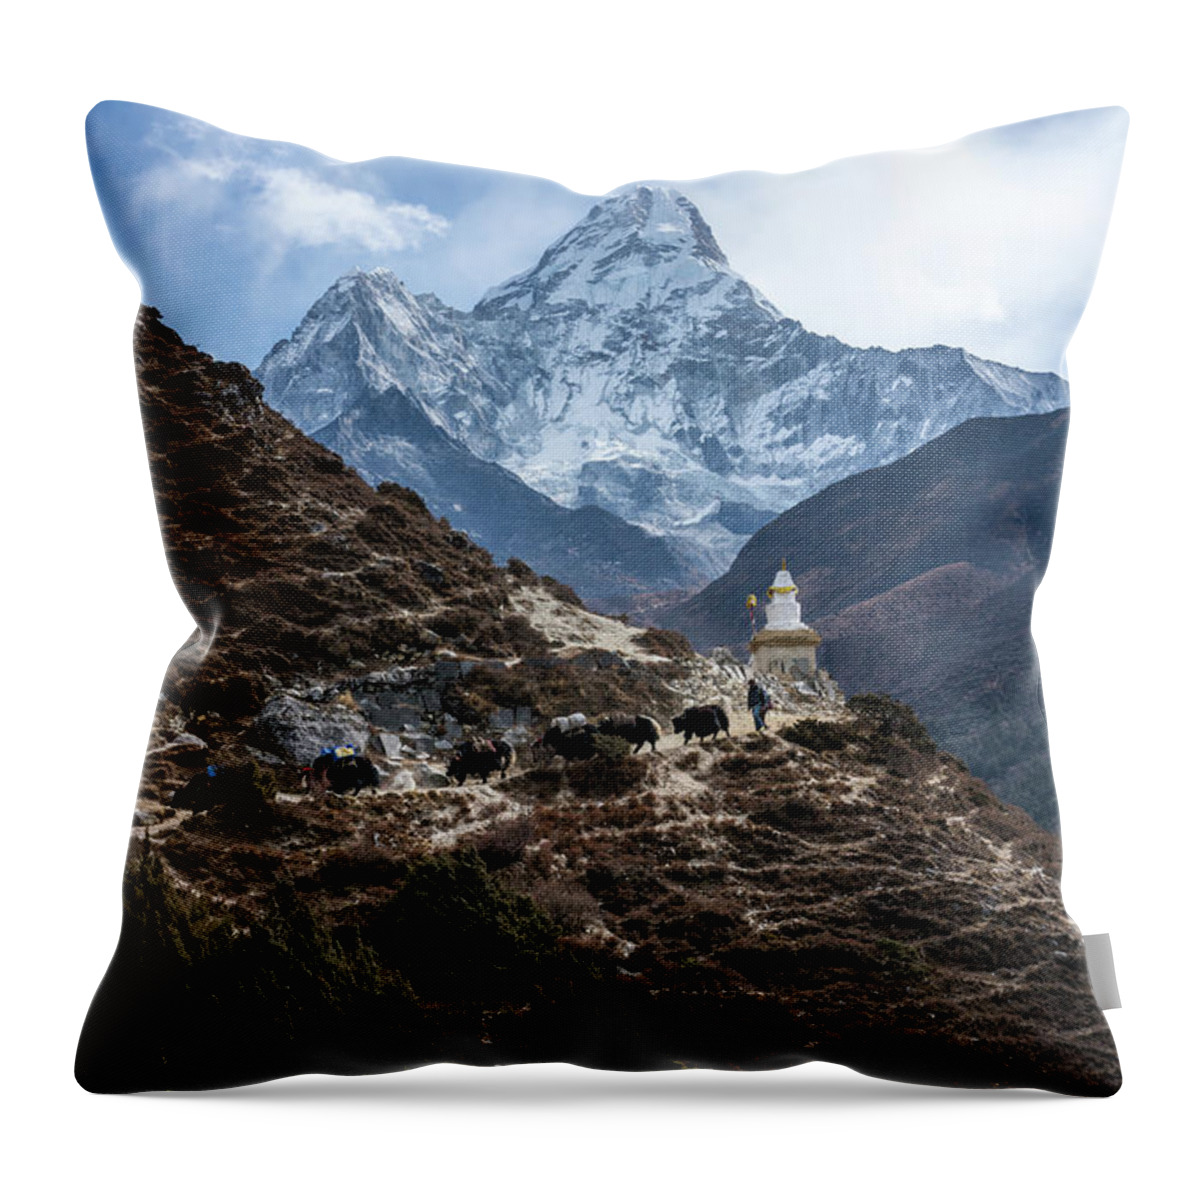 Ama Dablam Throw Pillow featuring the photograph Himalayan Yak Train by Mike Reid